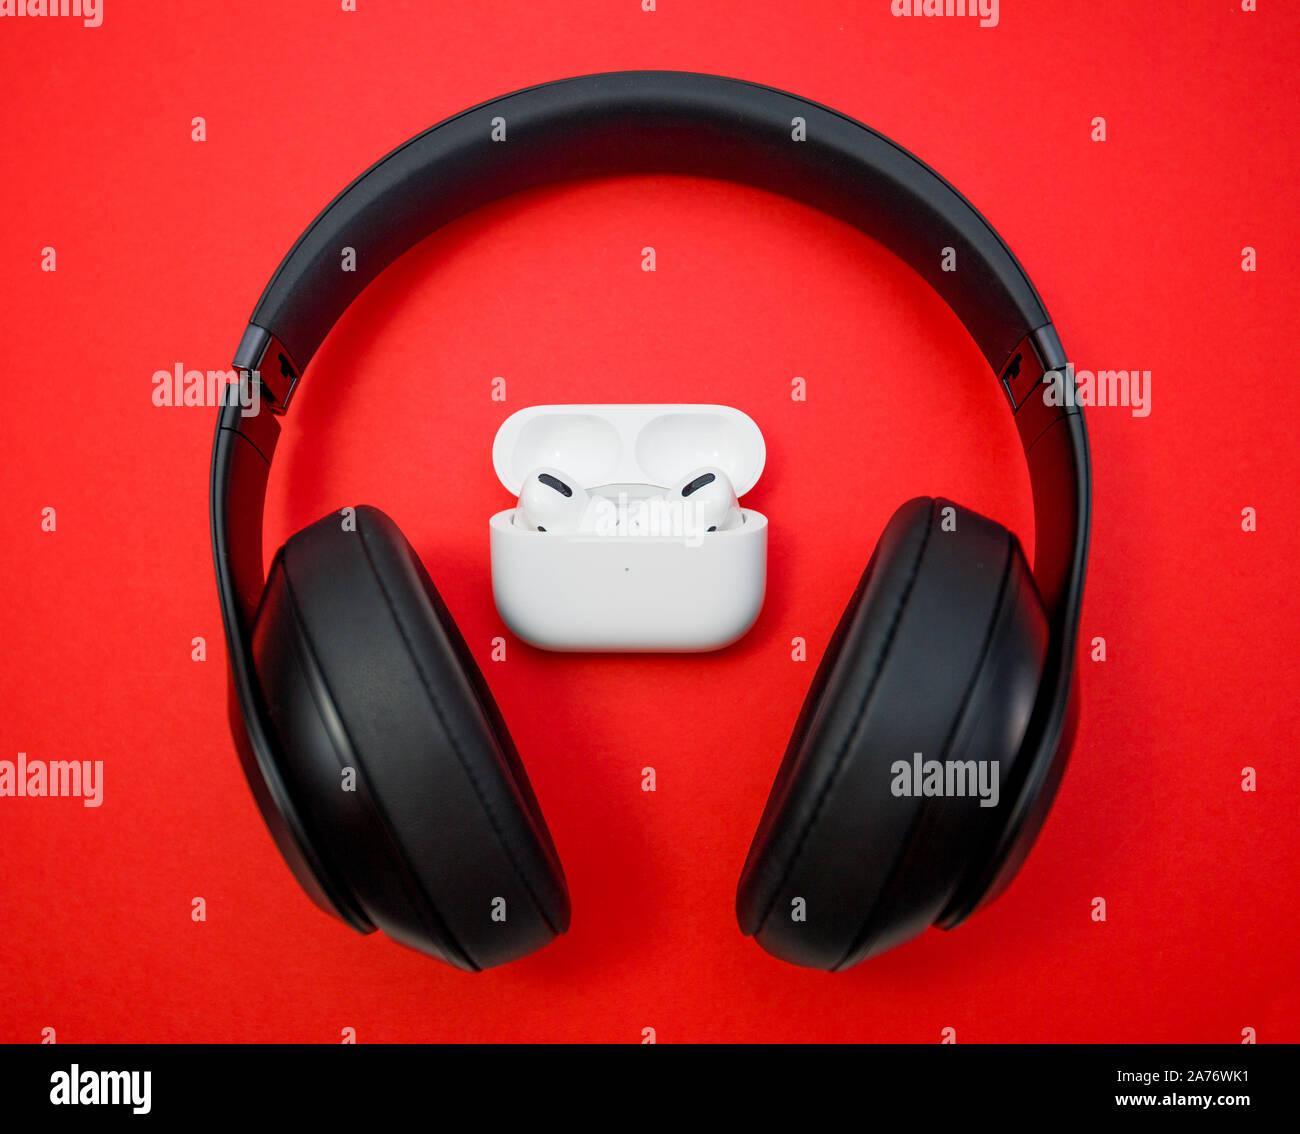 Paris, France - Oct 30, 2019: New Apple Computers AirPods Pro headphones with Active Noise Cancellation for immersive sound and Beats Studio Wireless by Dr Dre Stock Photo